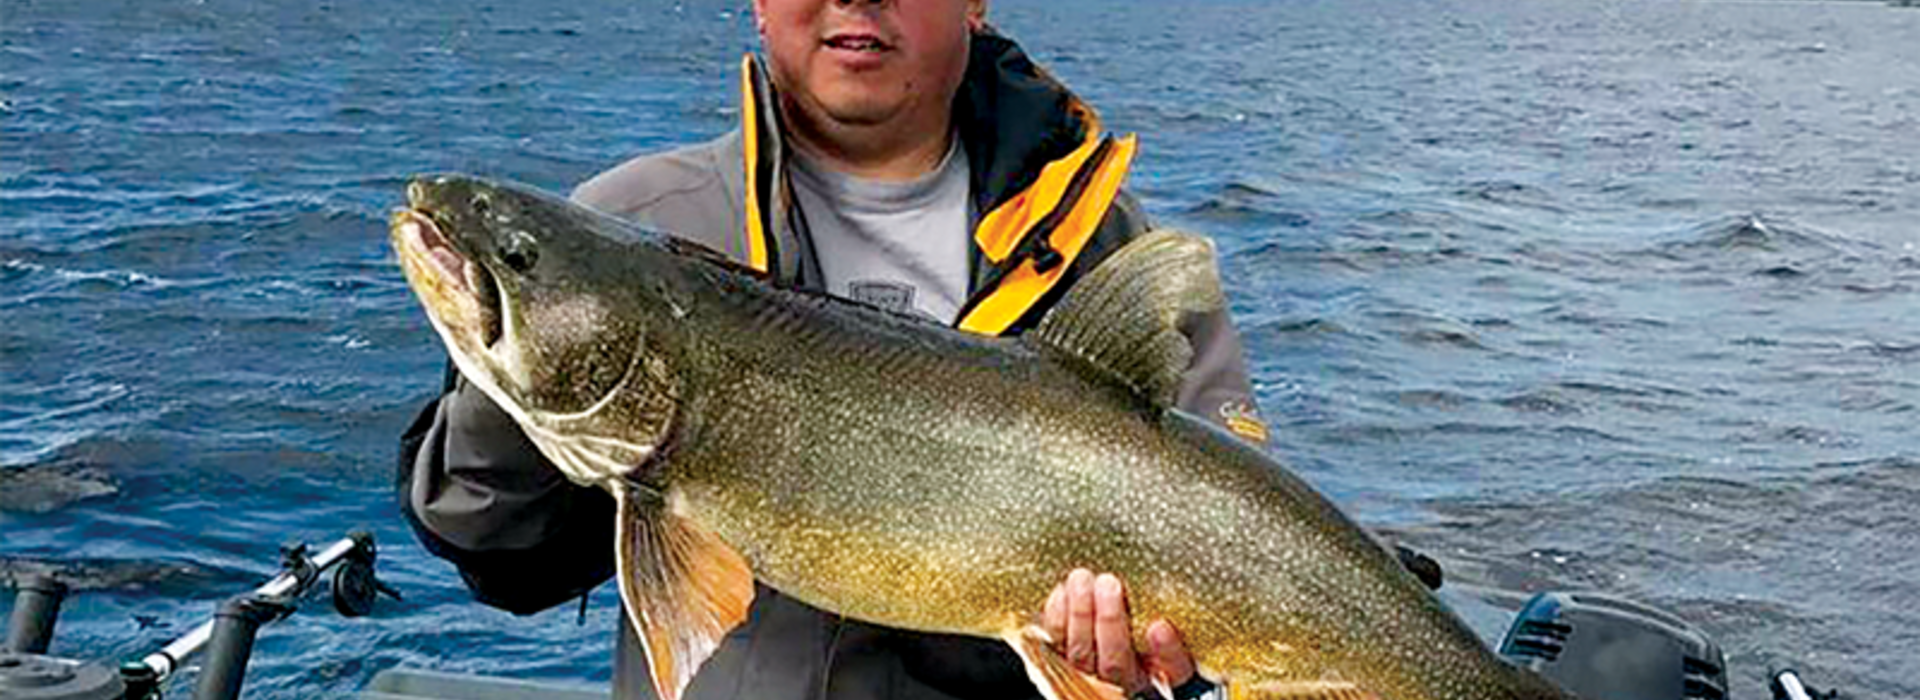 Chad Glirbas with a large fish